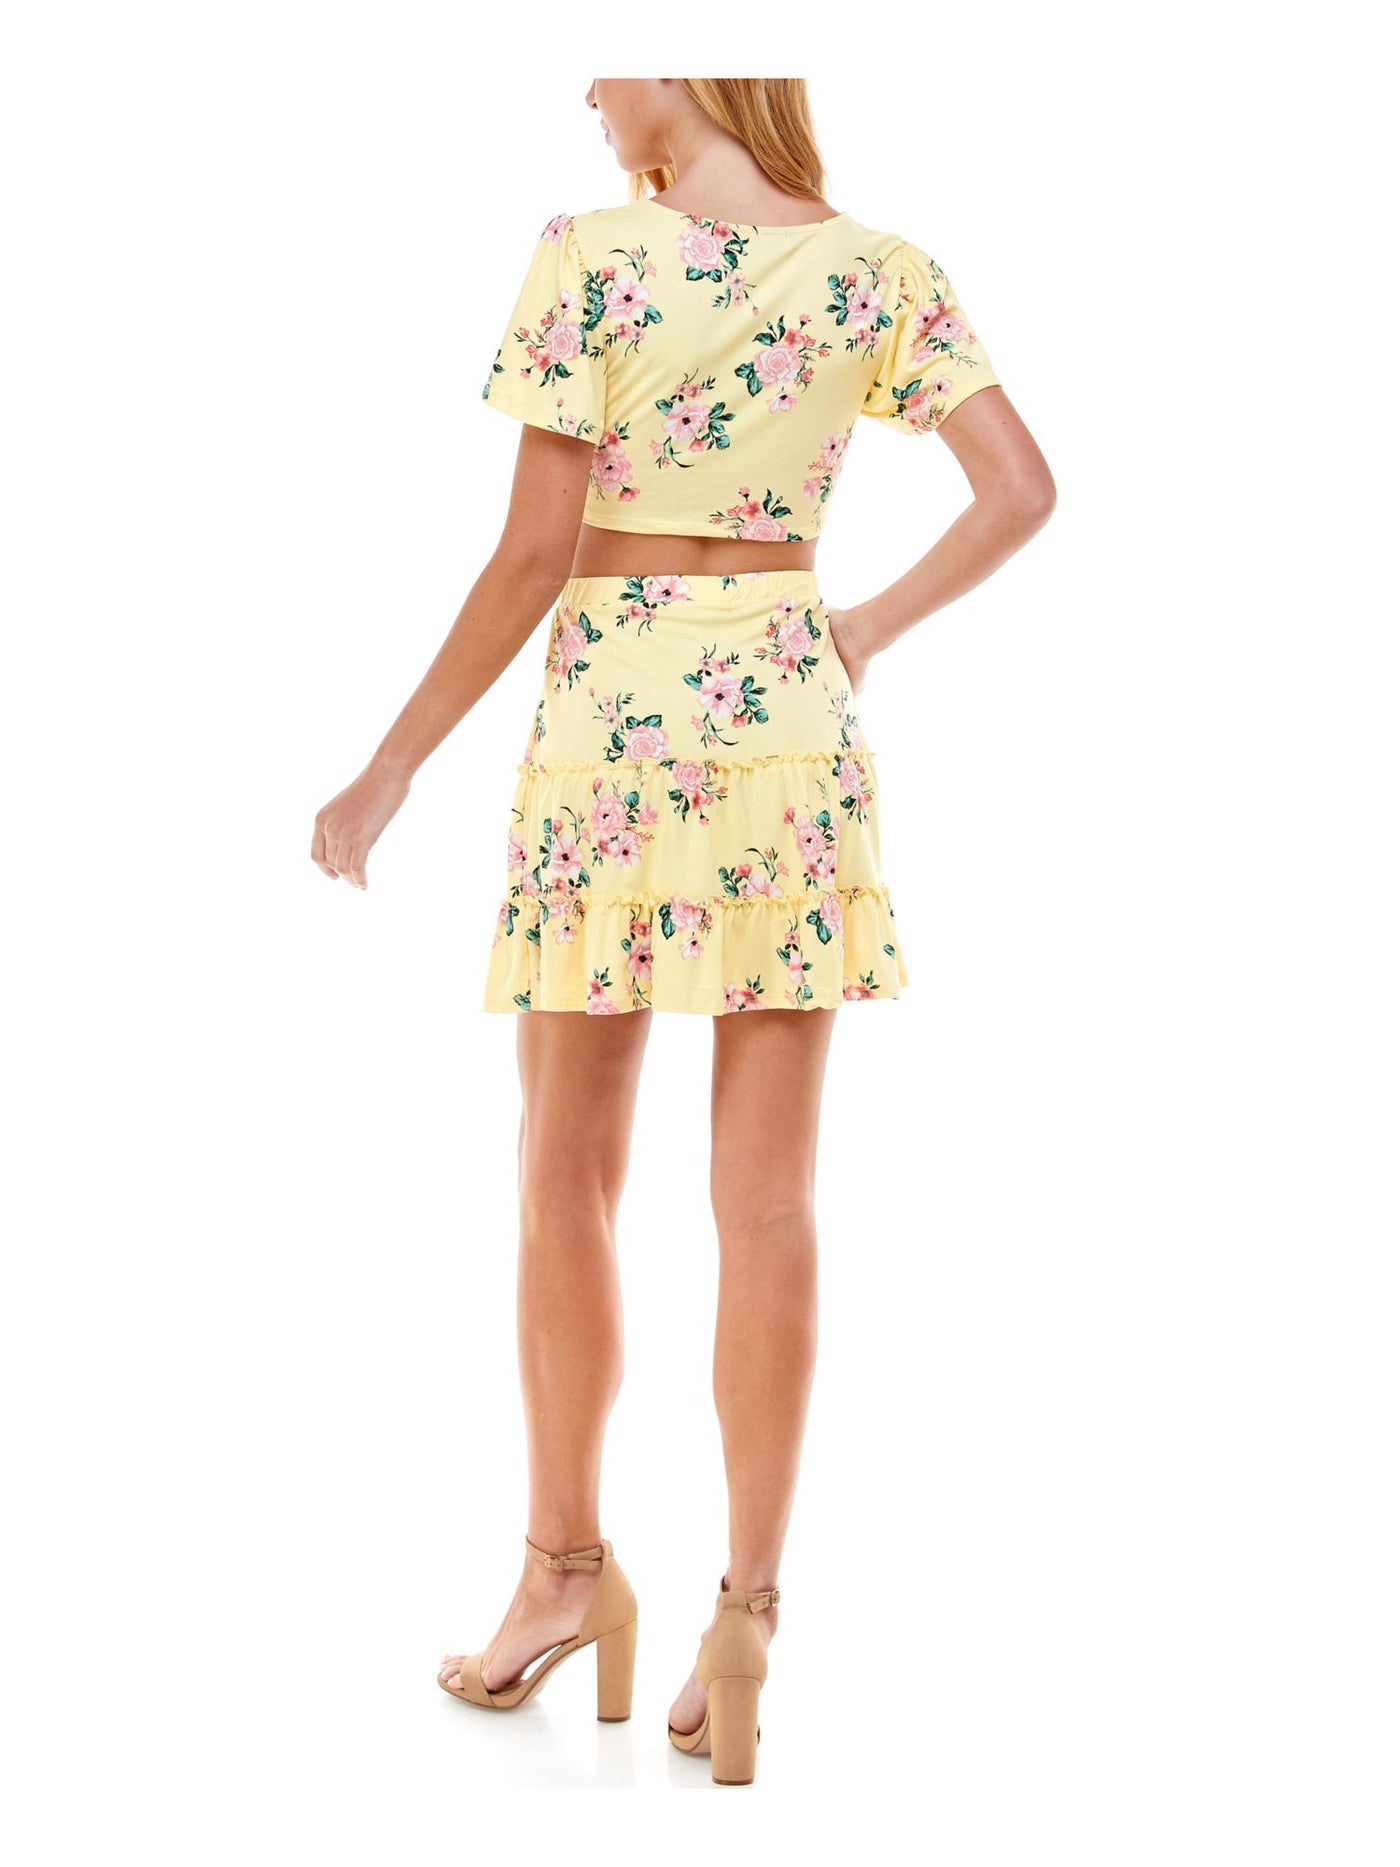 ALMOST FAMOUS Womens Yellow Stretch Ruffled Ruched Tie Crop Top Floral Flutter Sleeve V Neck Mini Party A-Line Dress Juniors M